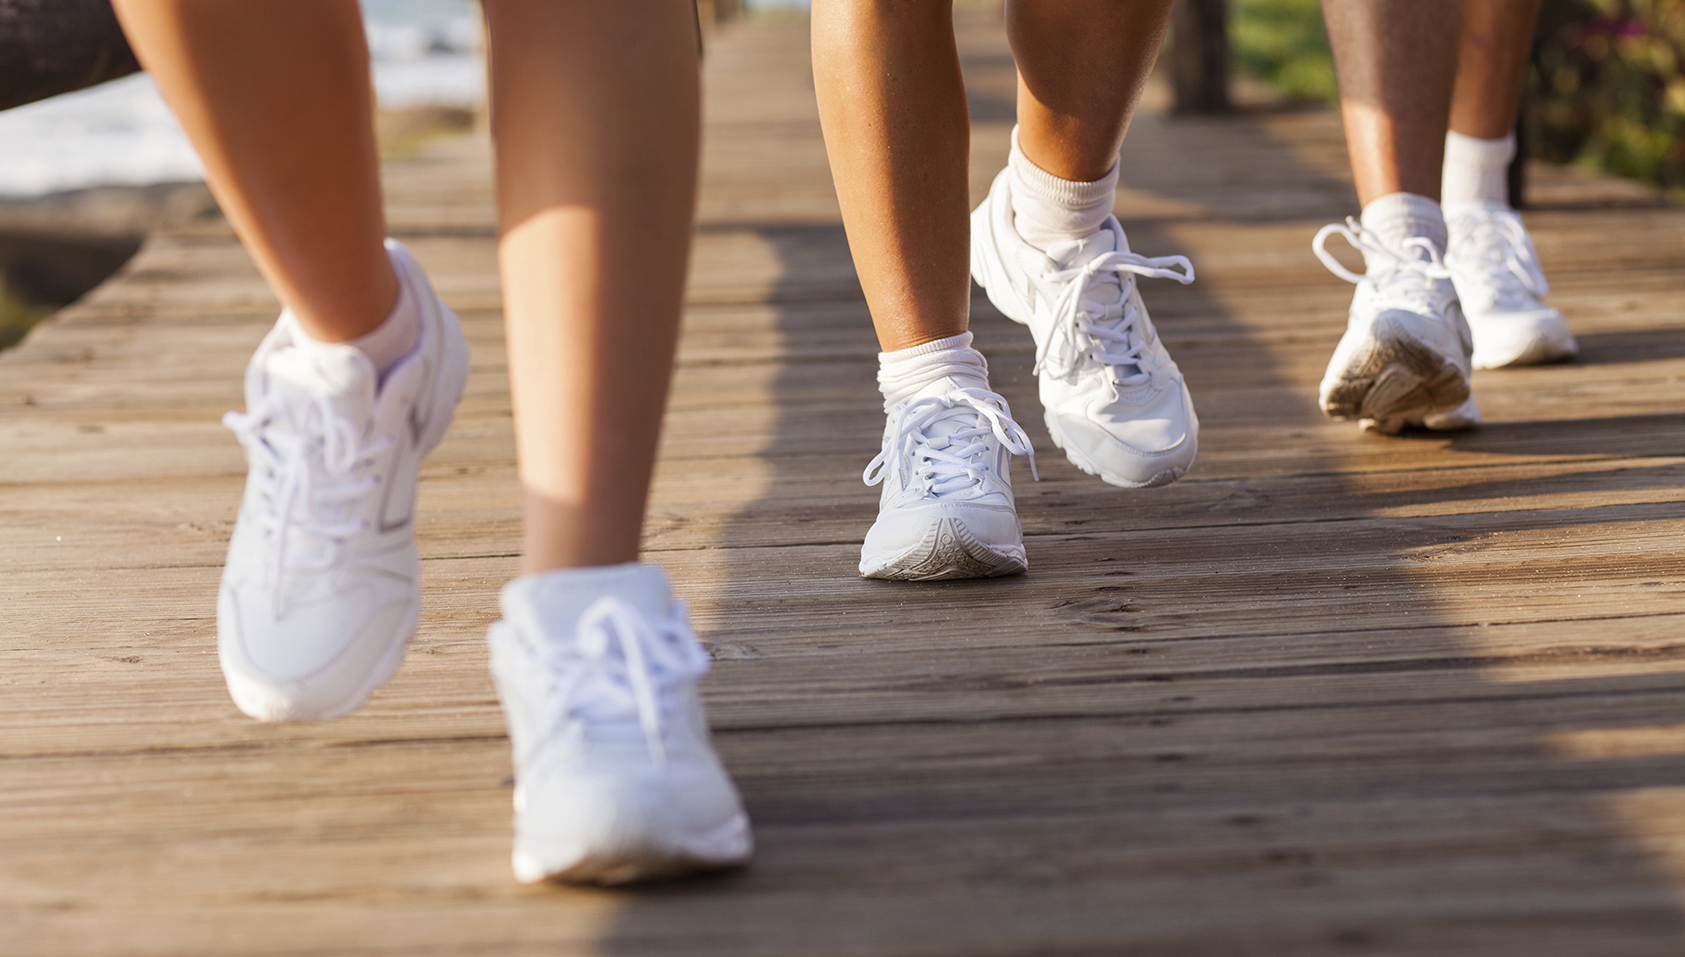 Walking vs. running: Our two proponents make their case